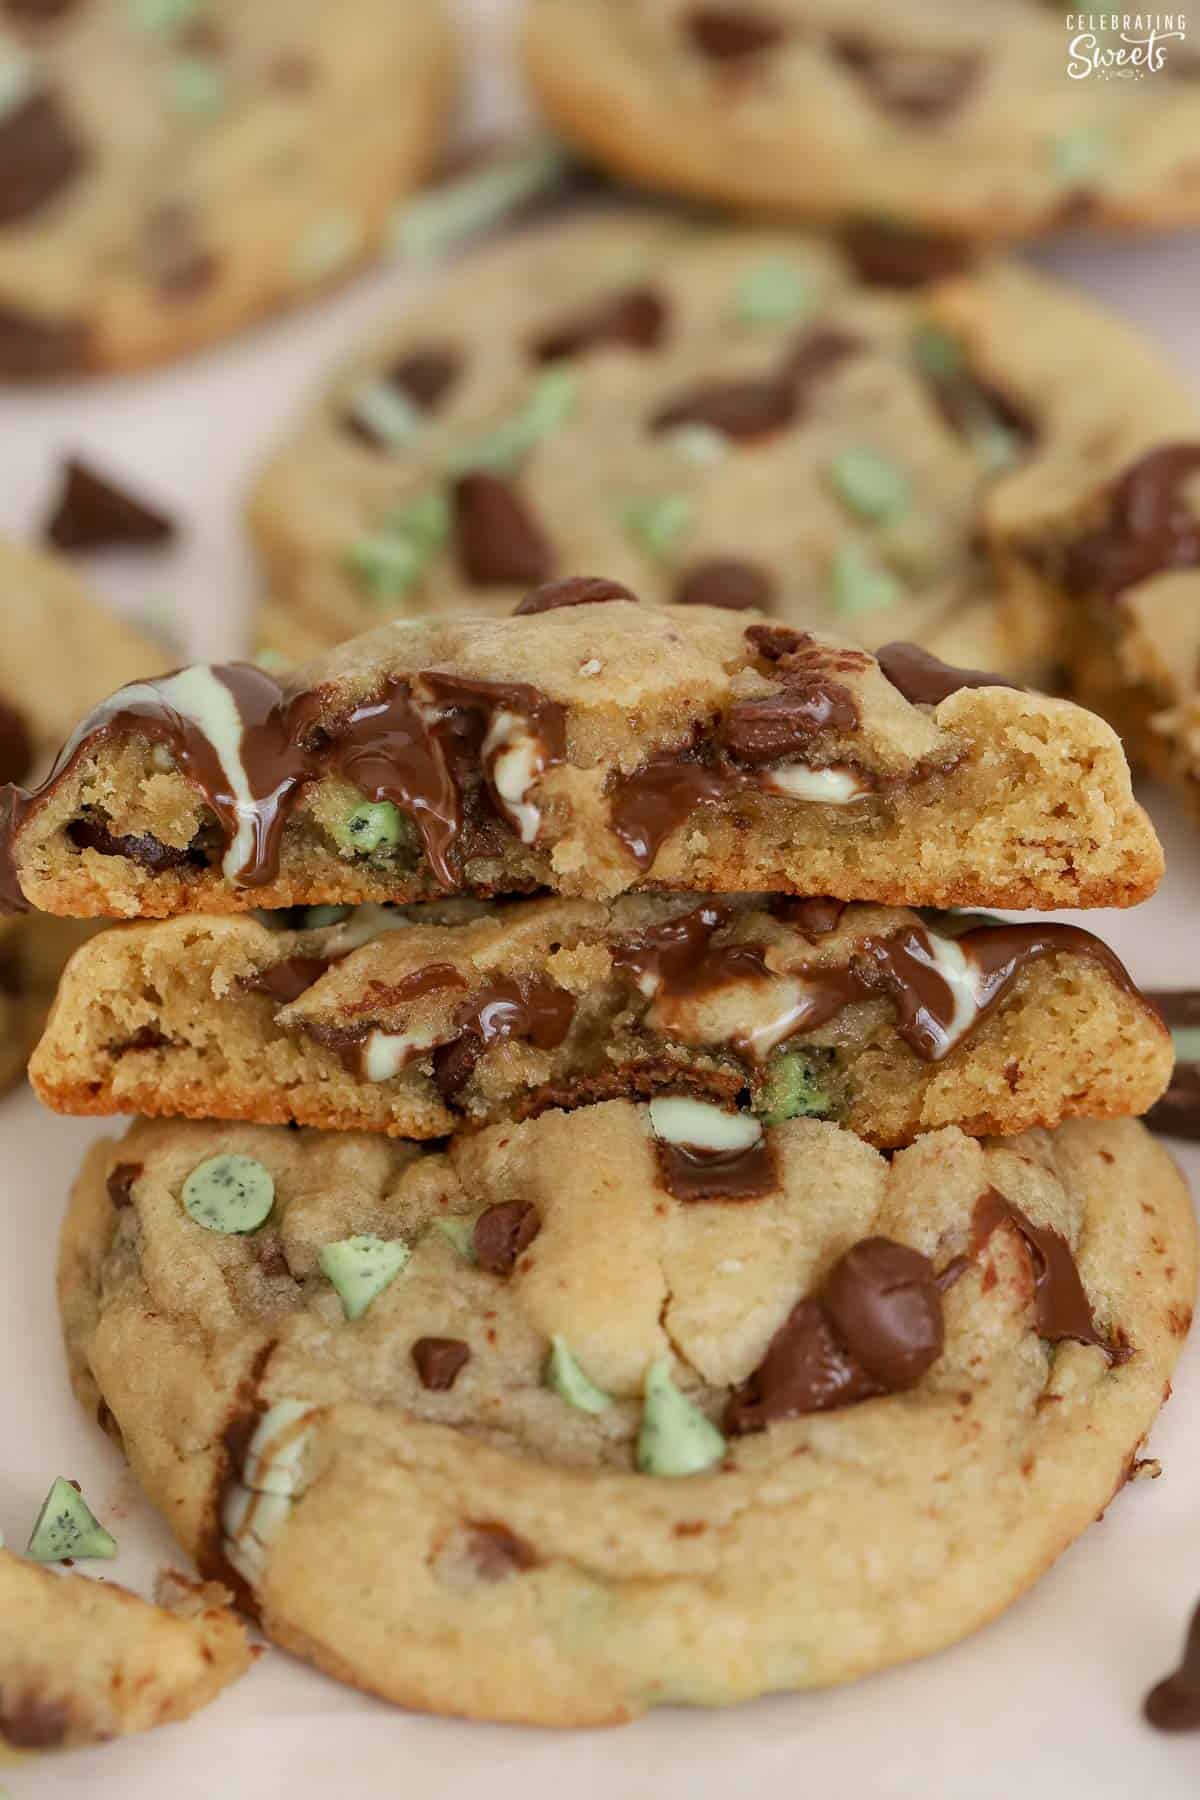 Mint chocolate chip cookie split in half stacked on top of each other.